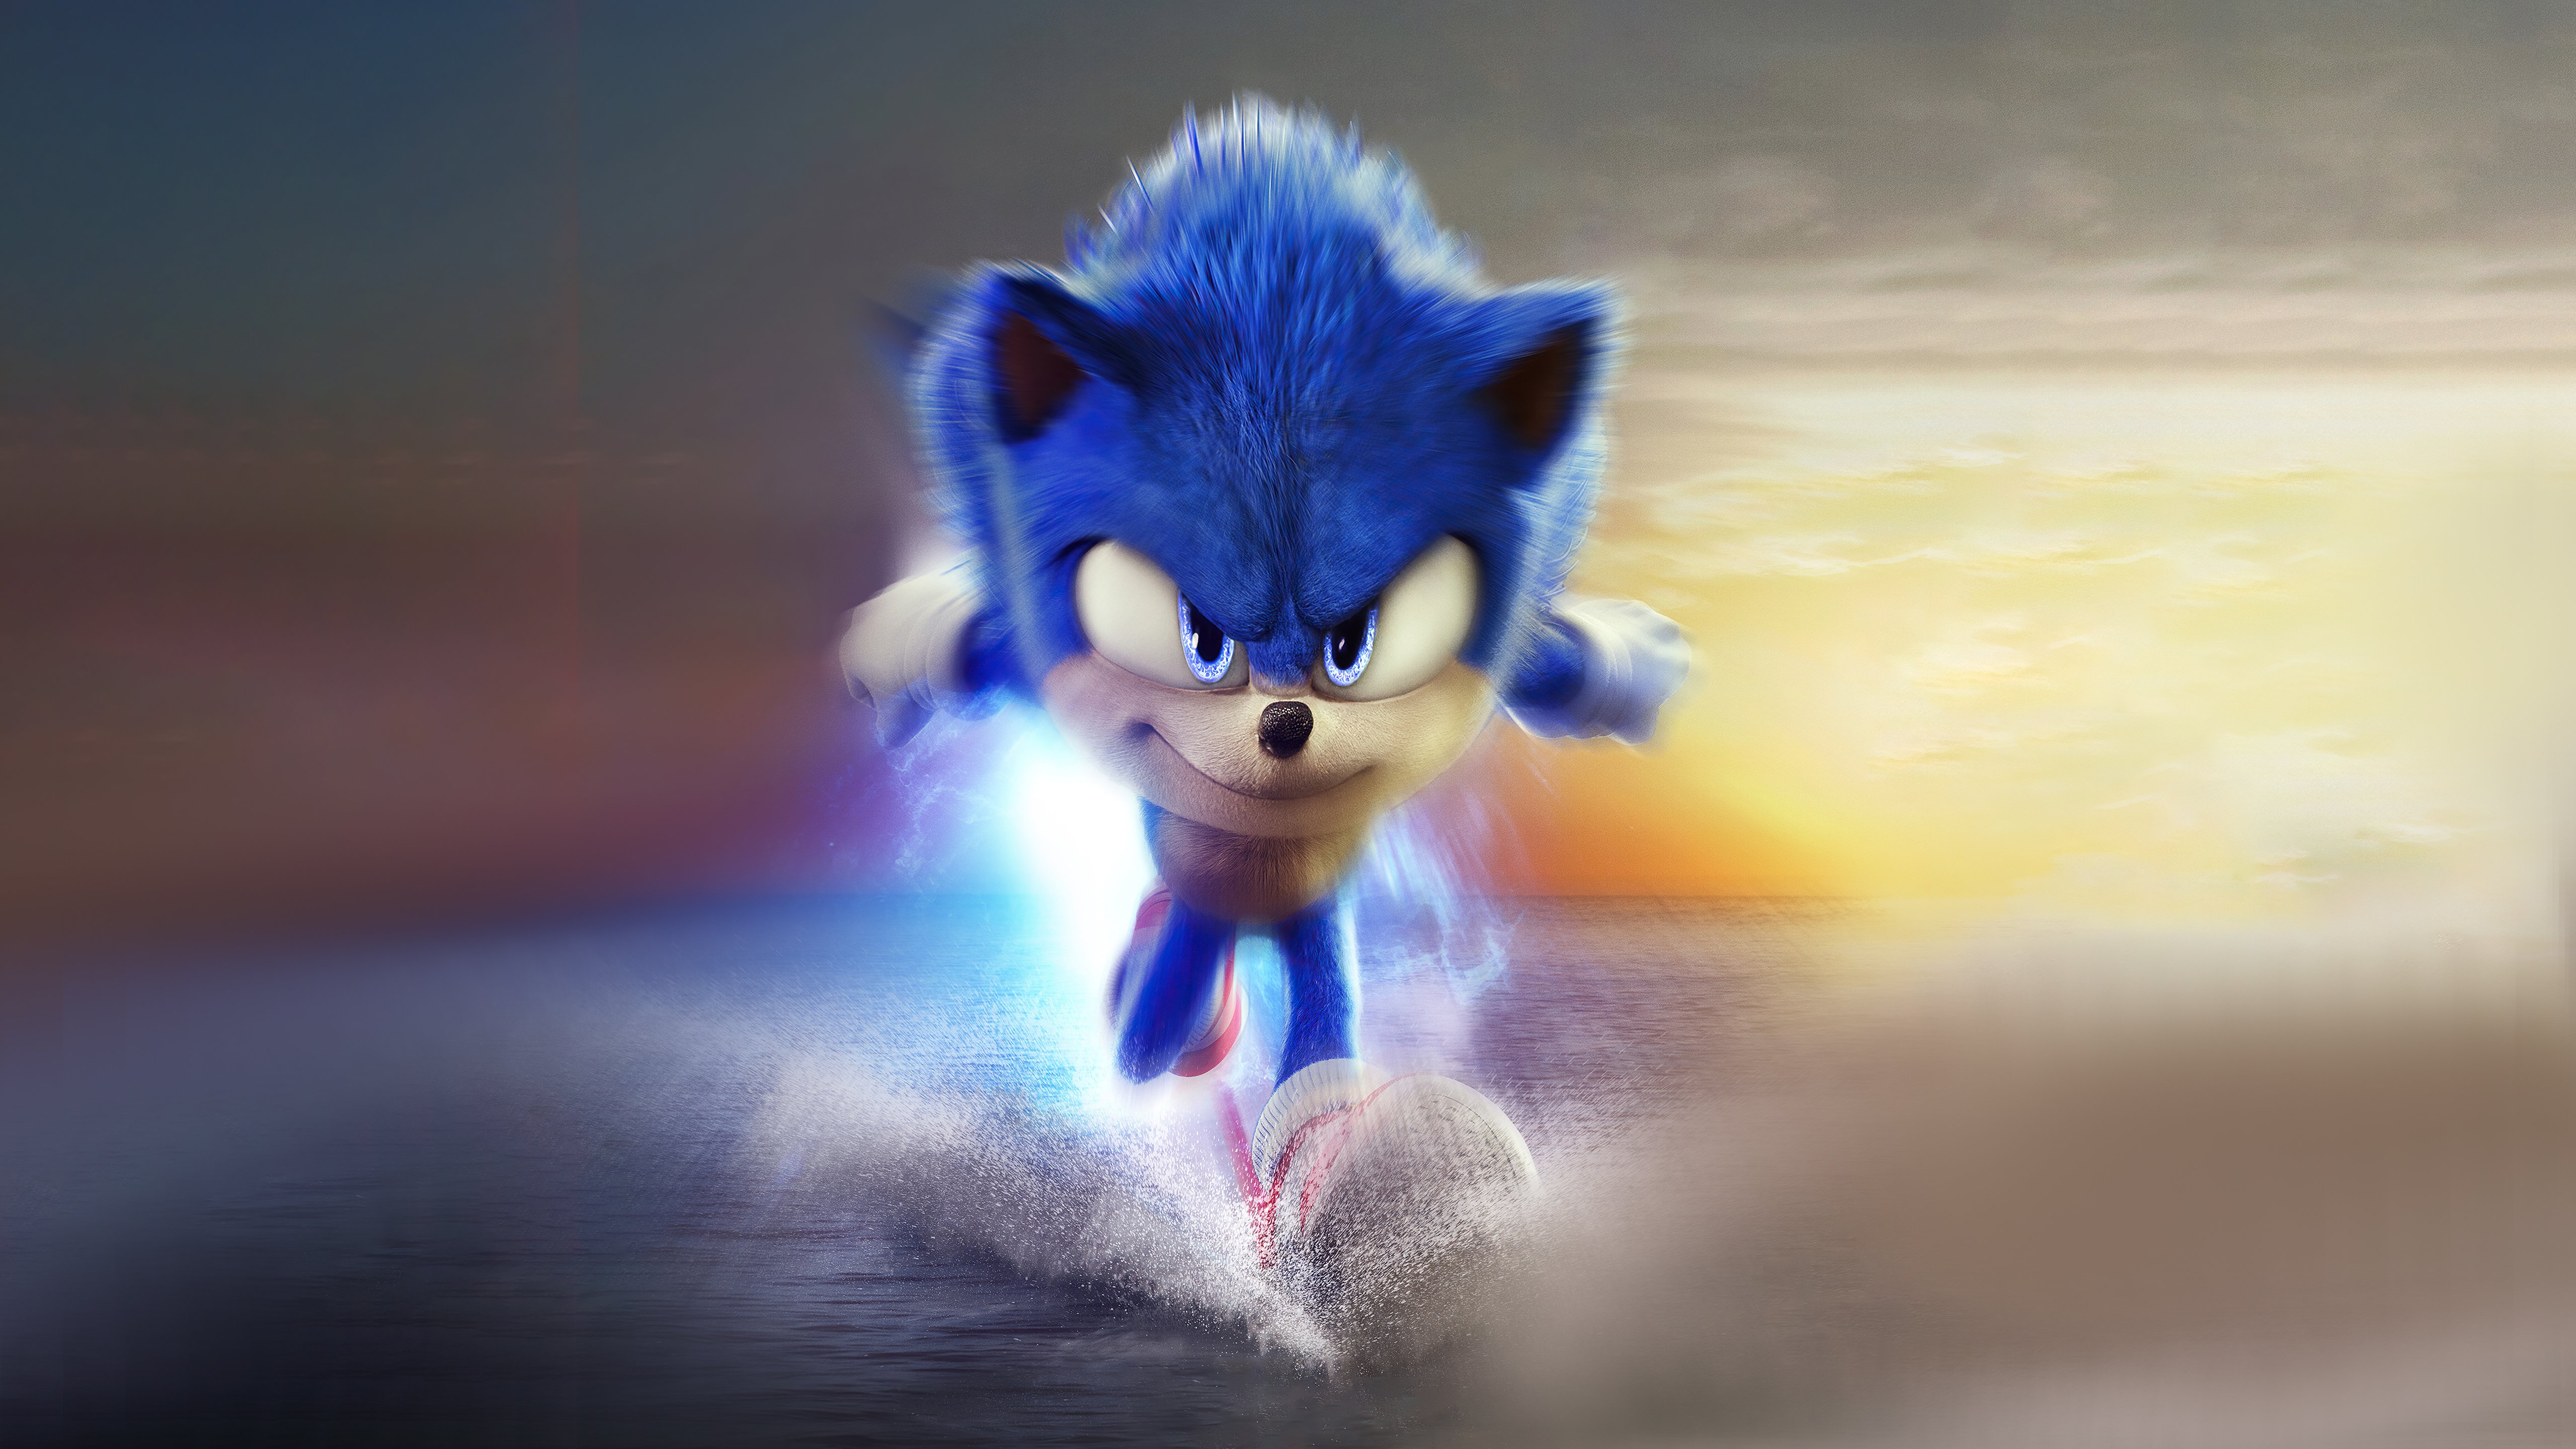 4K Sonic the Hedgehog Wallpaper and Background Image